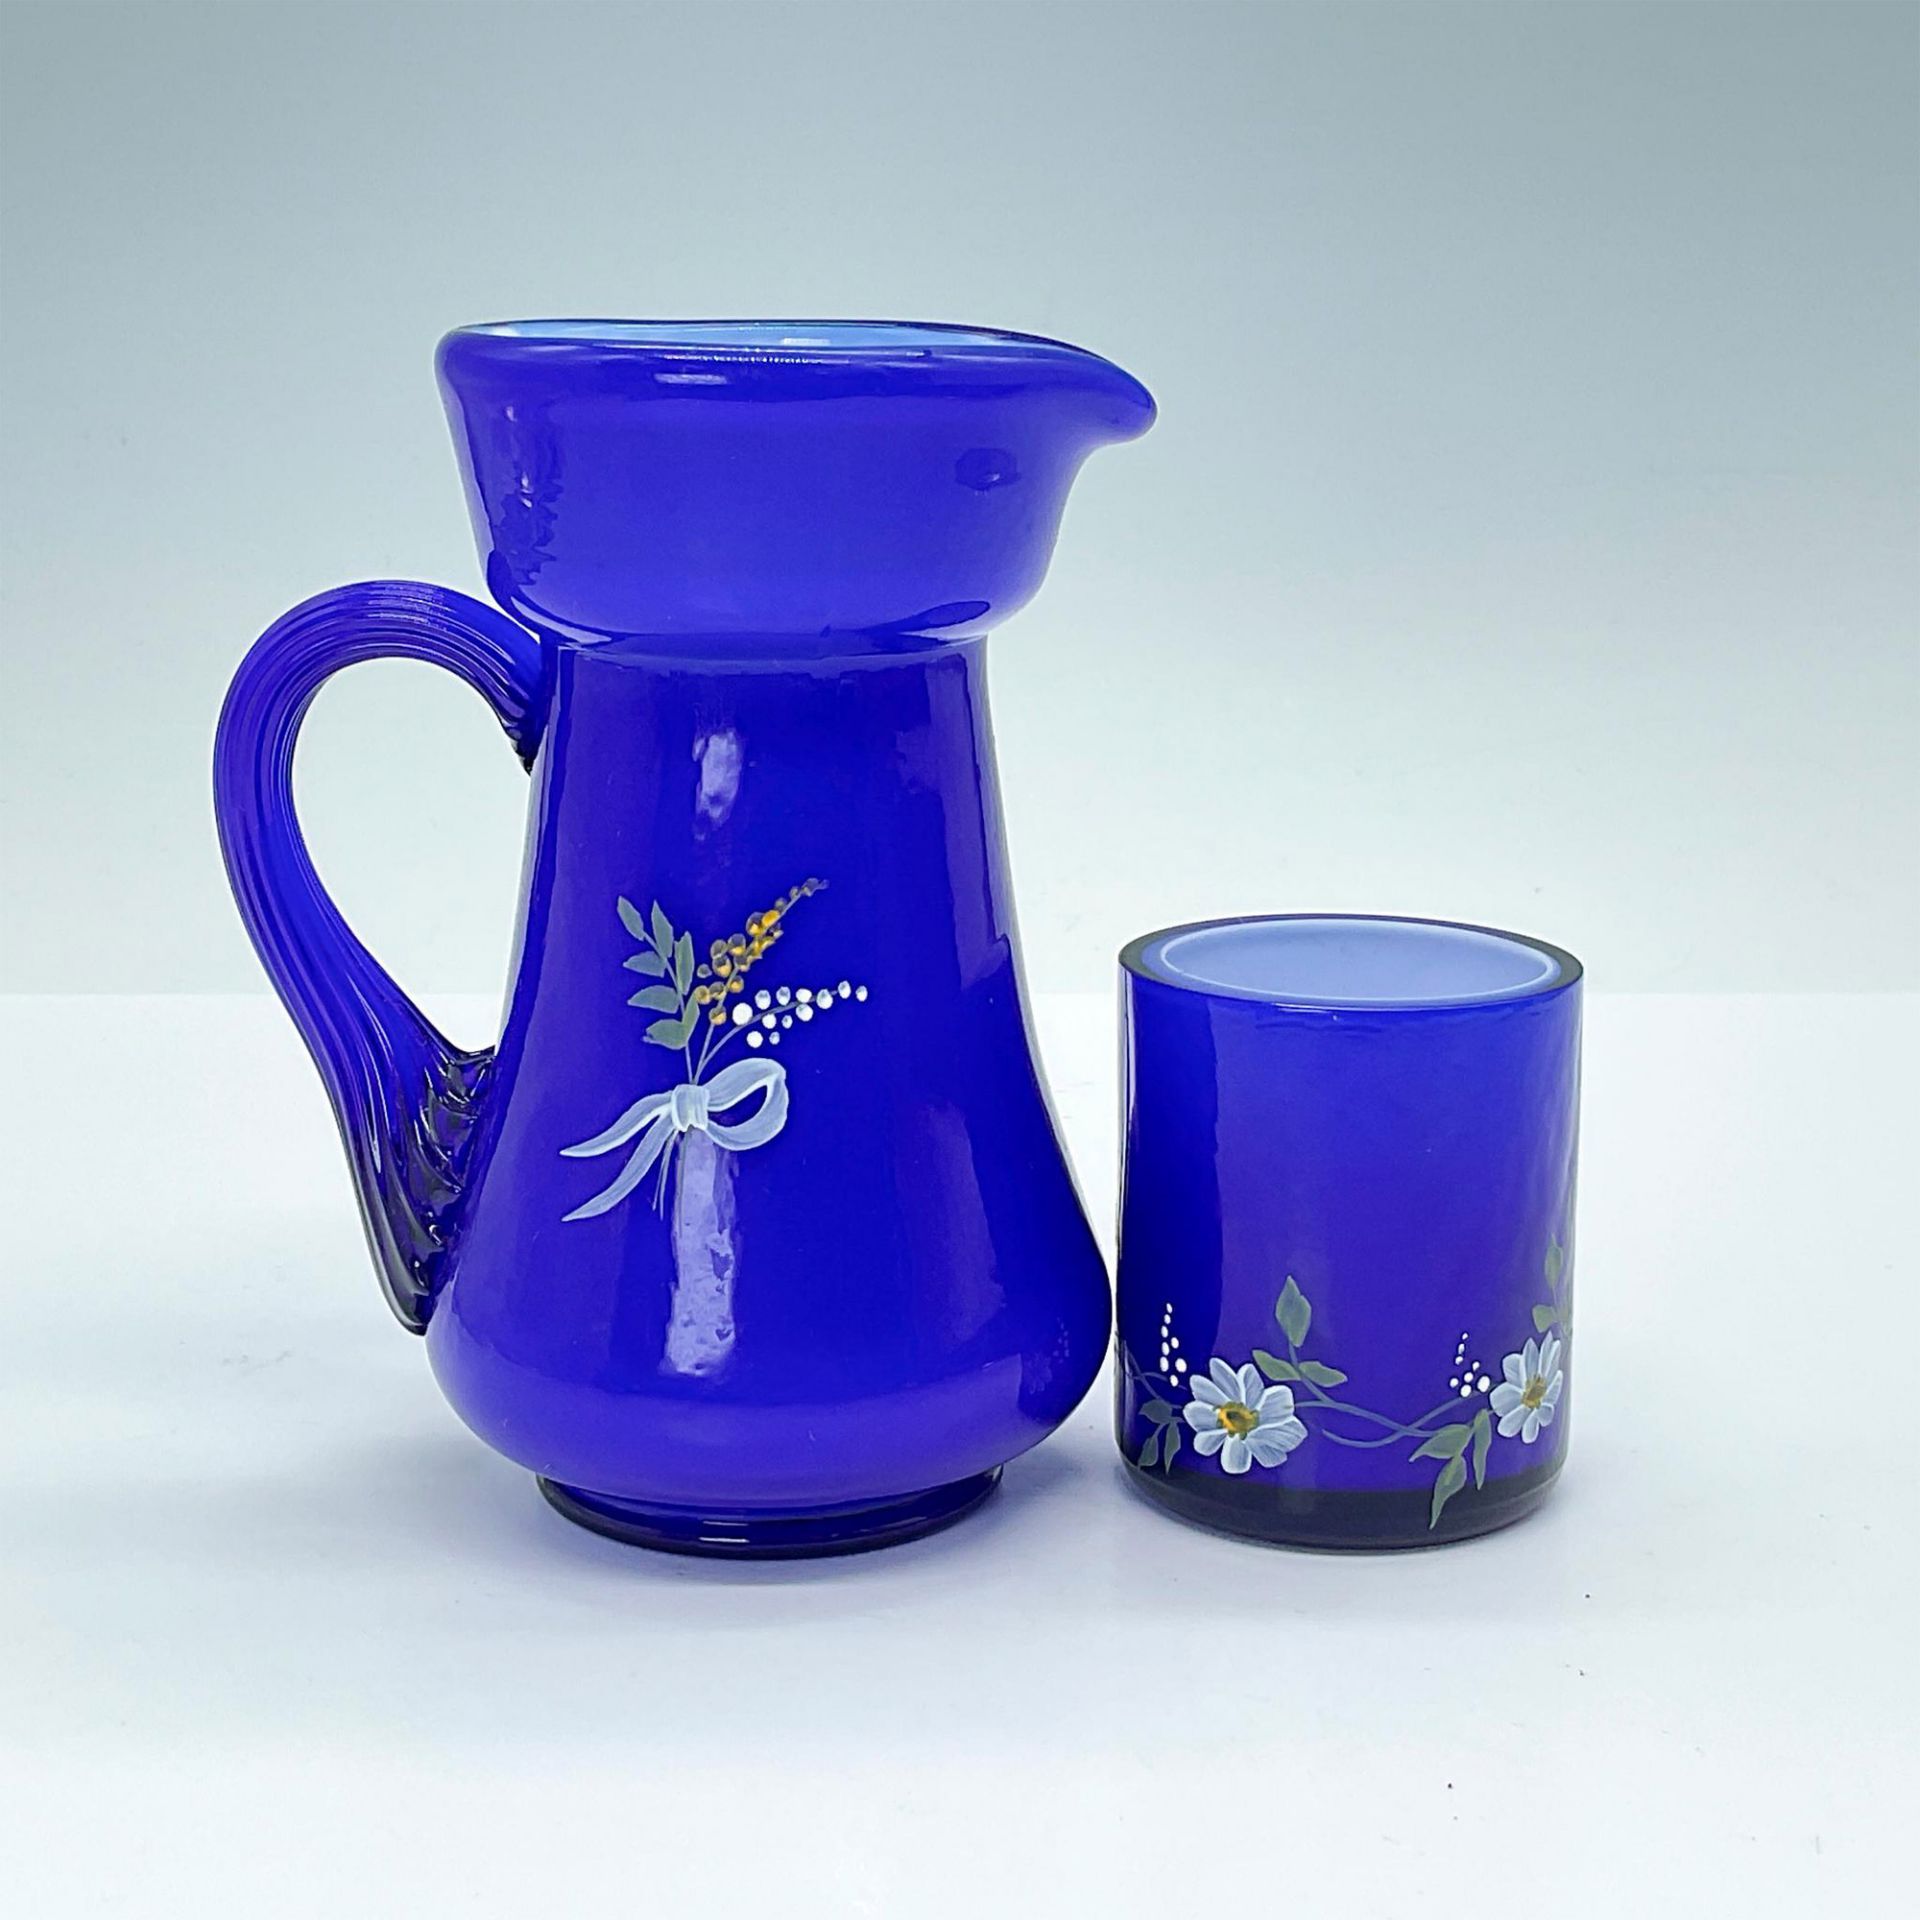 2pc Fenton Hand Painted by Linda Everson Child's Glass Water Pitcher and Cup - Image 2 of 3